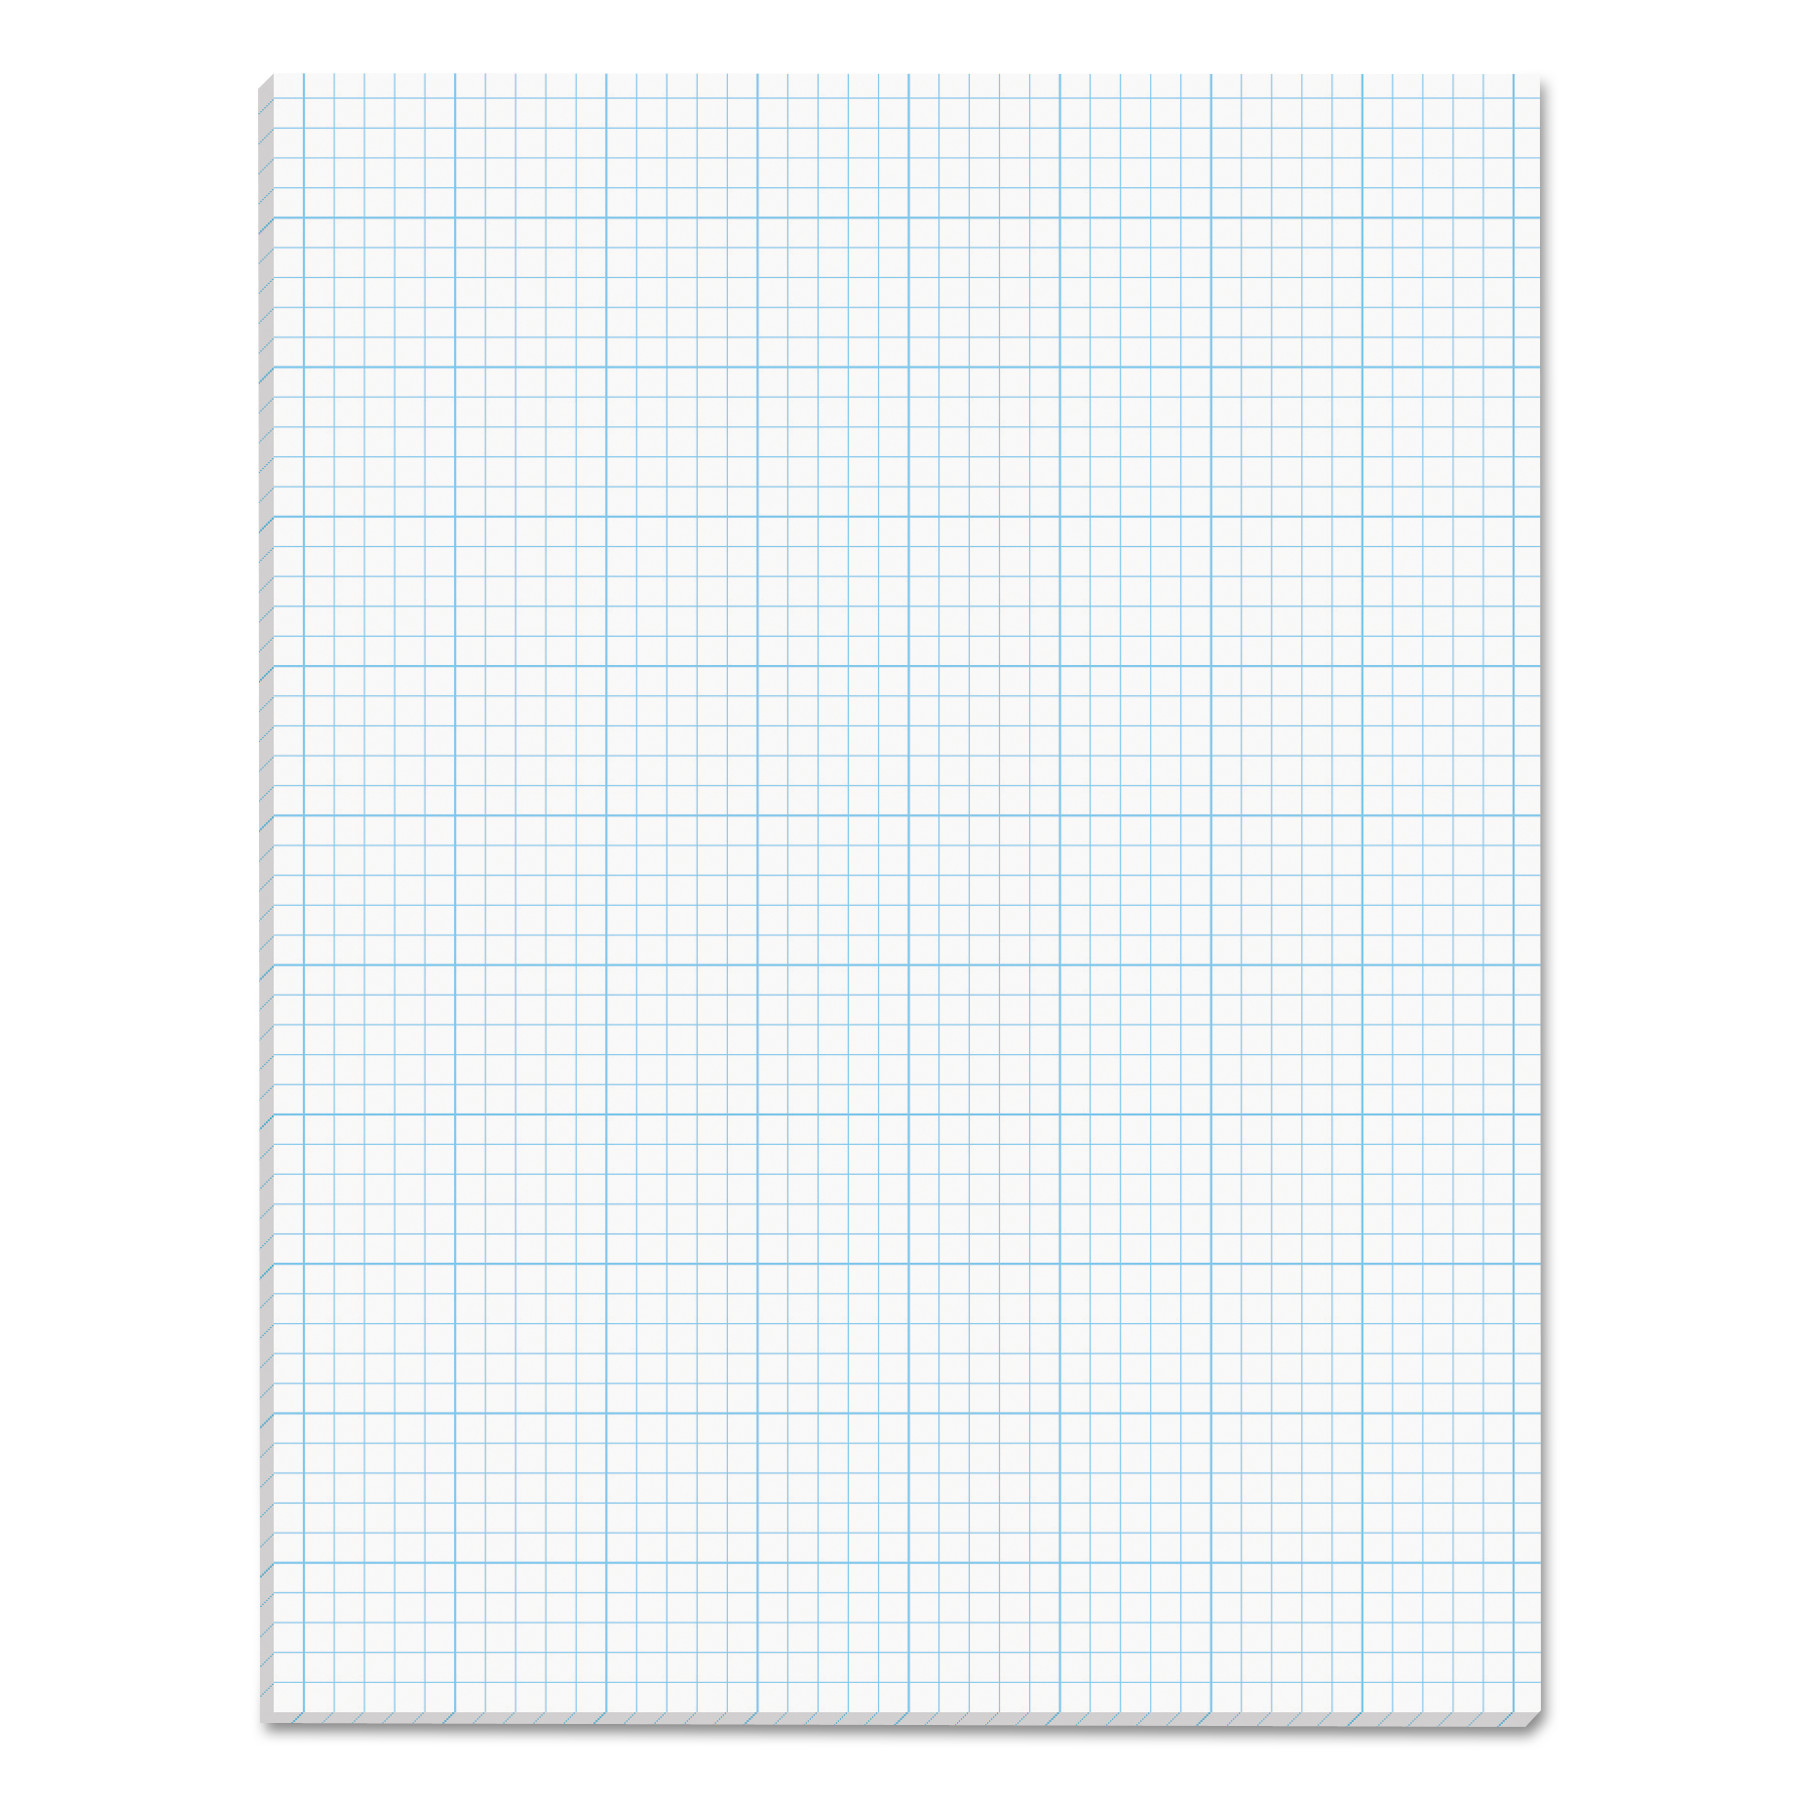  TOPS 35051 Cross Section Pads, 5 sq/in Quadrille Rule, 8.5 x 11, White, 50 Sheets (TOP35051) 